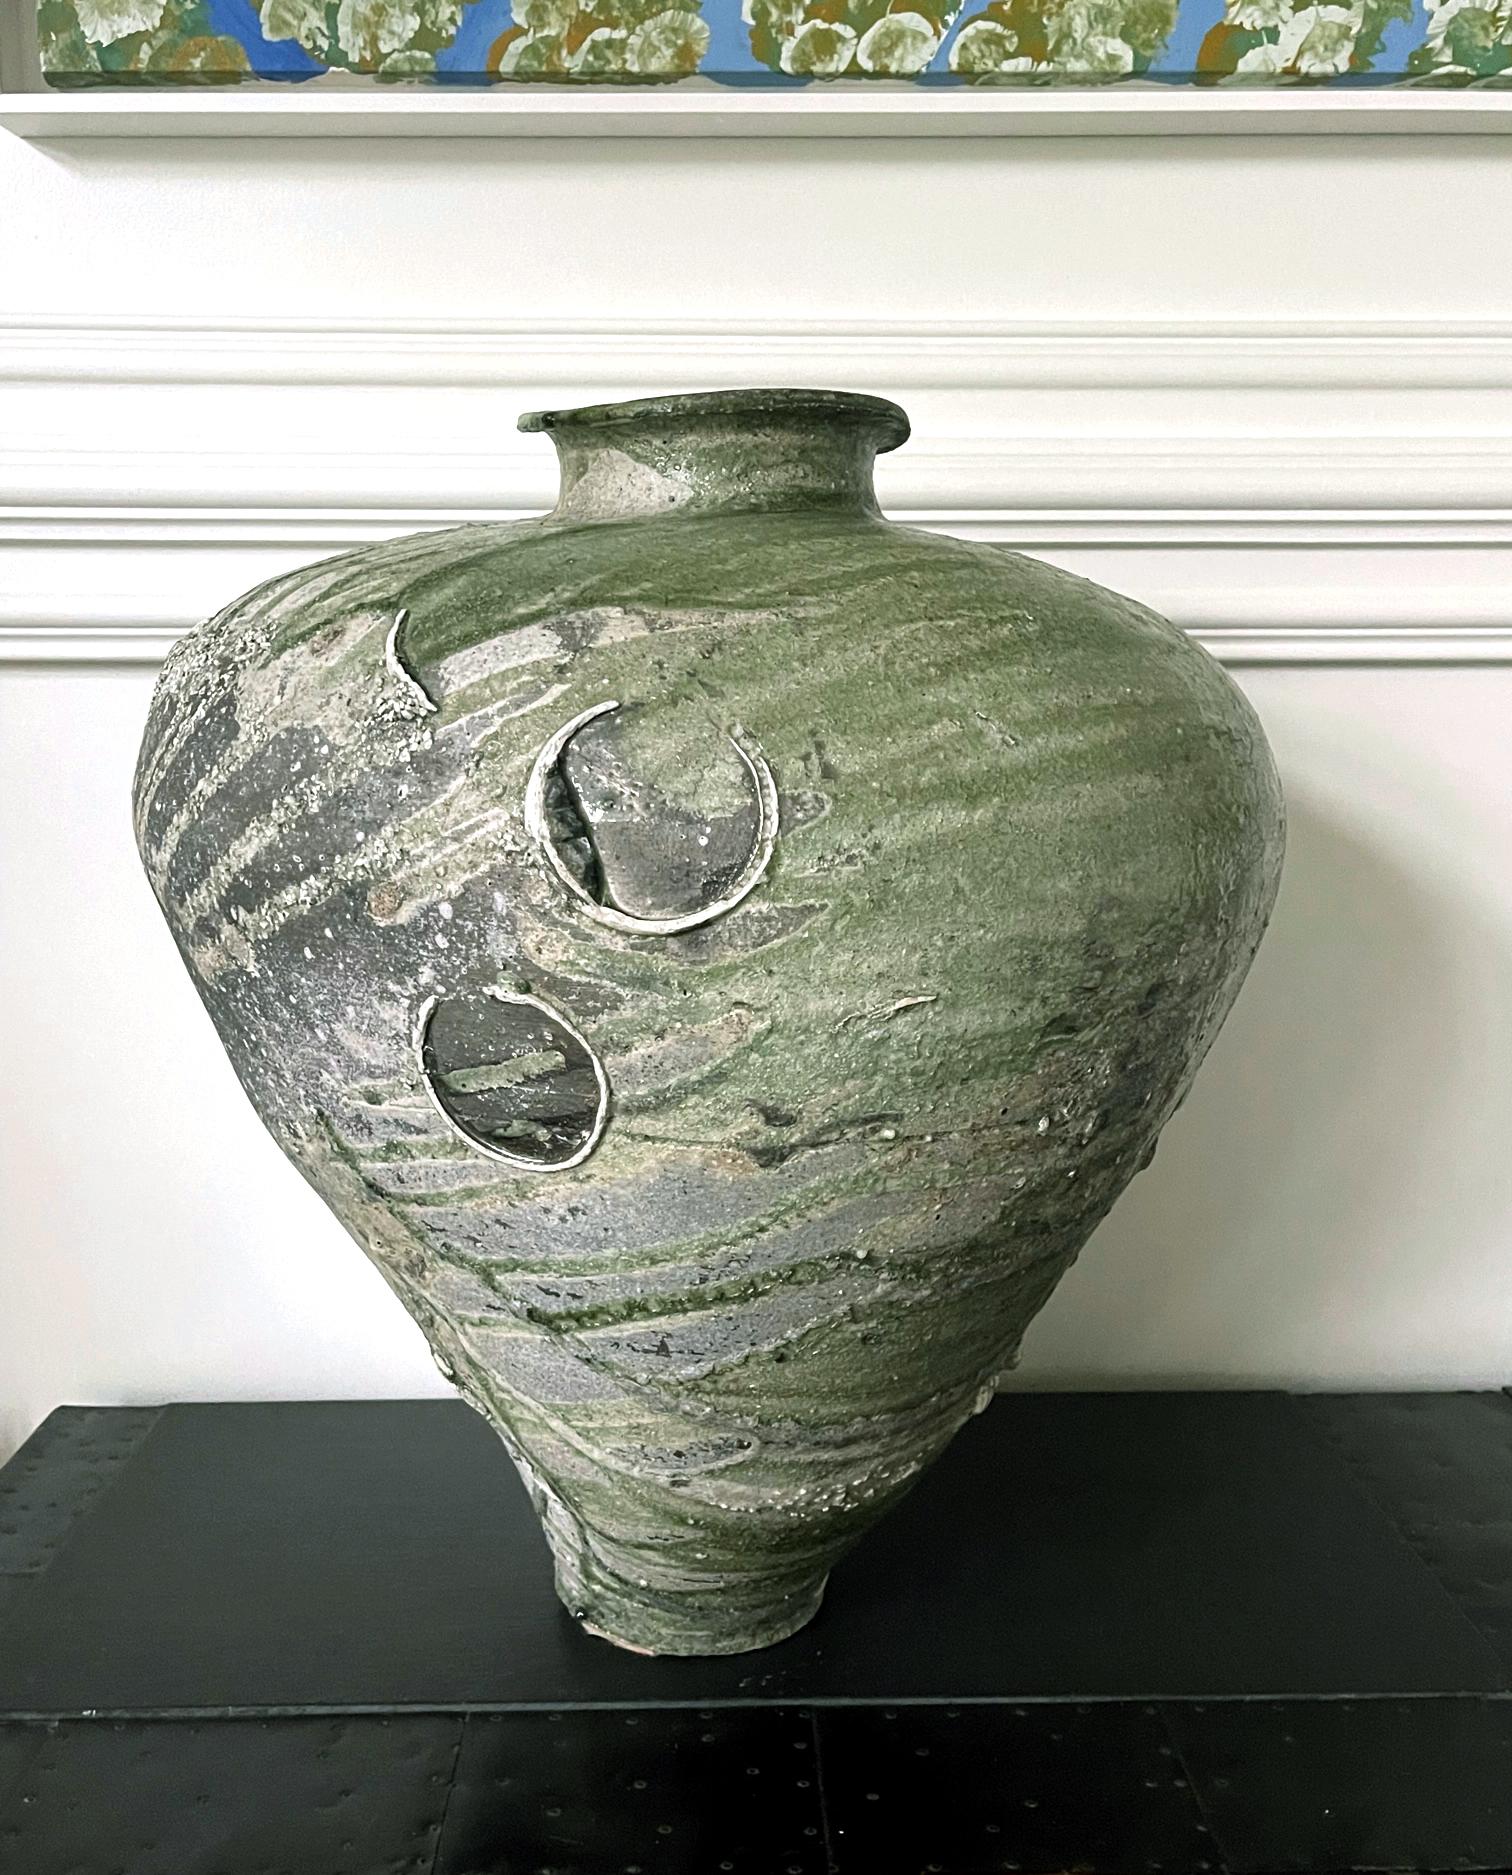 A massive and magnificent ceramic Tsubo jar by Japanese potter Tsujimura Yui (1975-). Inspired by the techniques and aesthetics of the early medieval Sue ware, the artist hand builds an impressive voluminous oviform, irregular by intention, from a